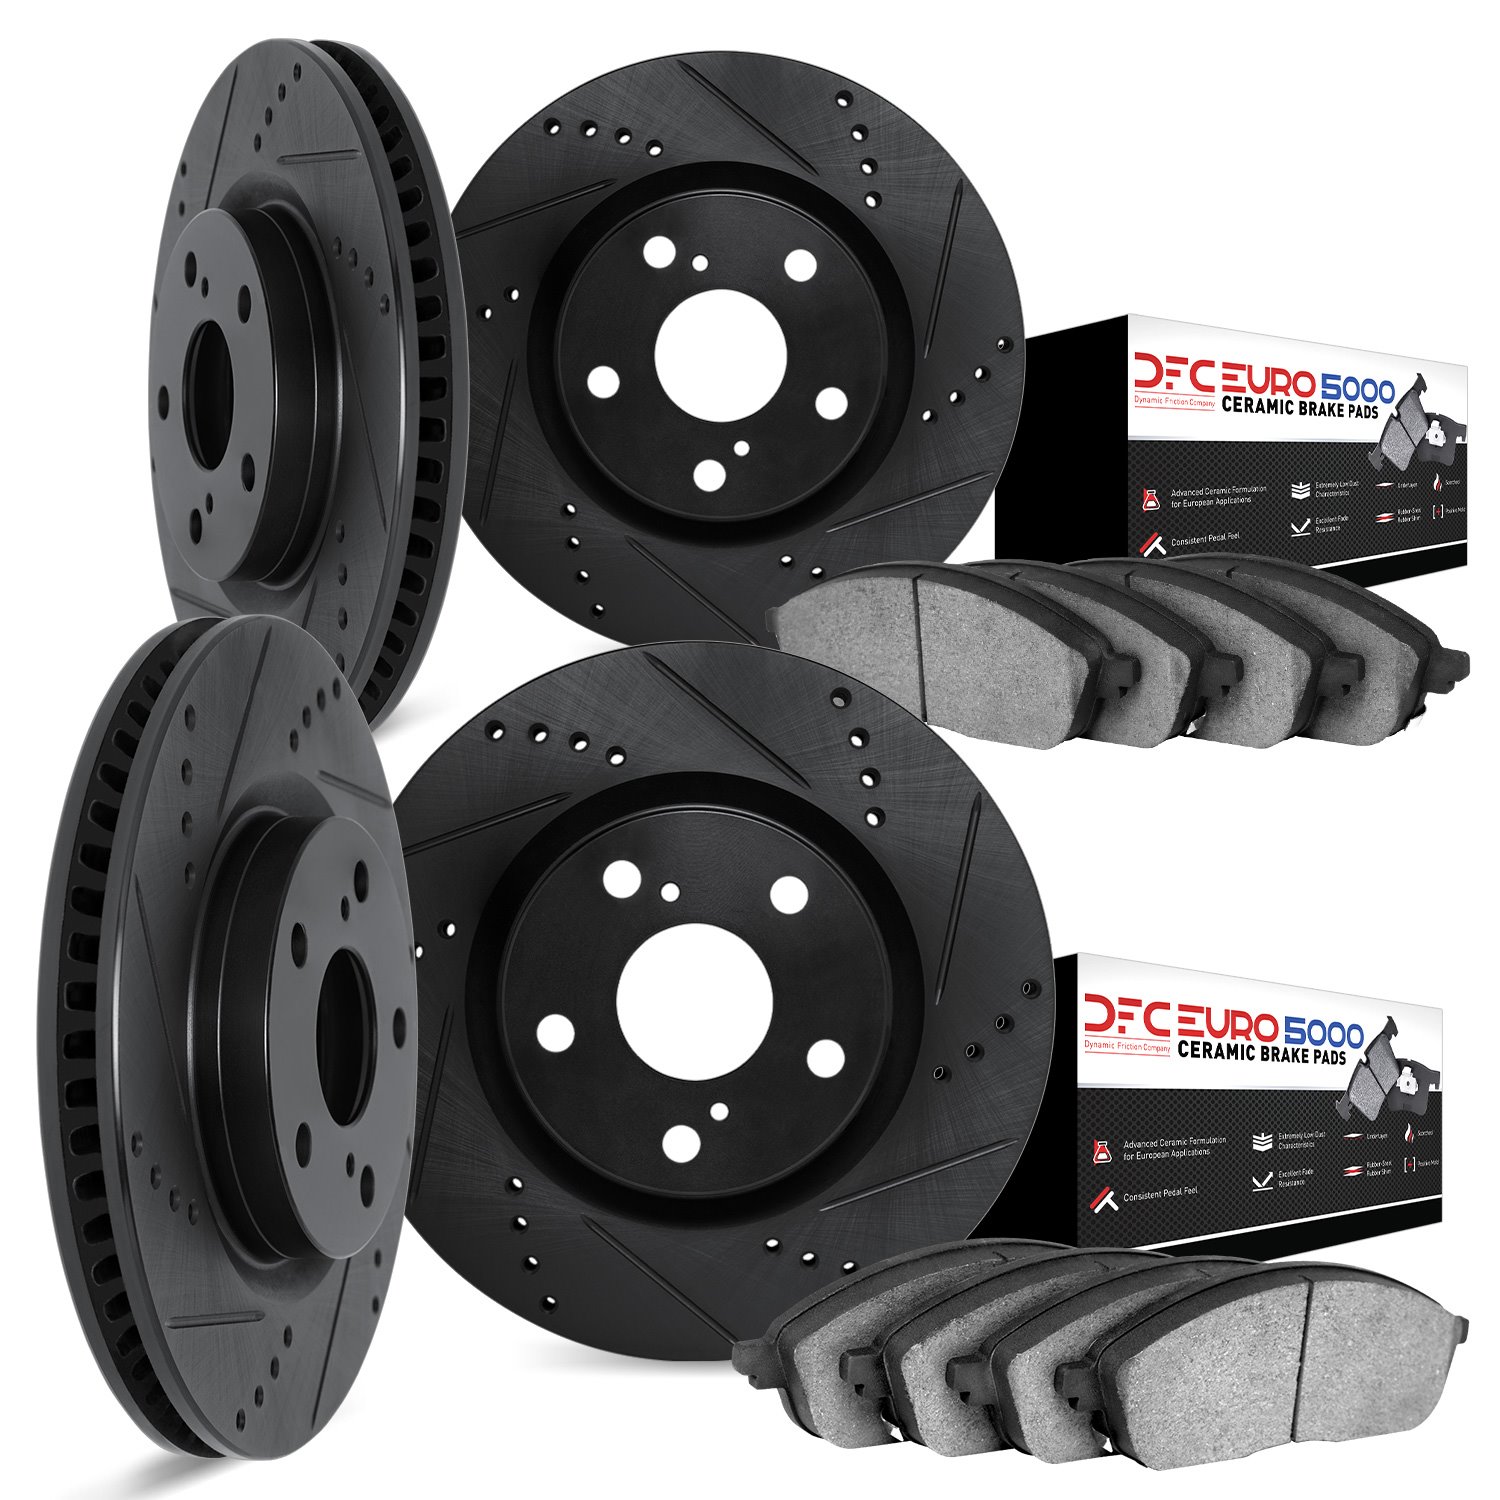 8604-02005 Drilled/Slotted Brake Rotors w/5000 Euro Ceramic Brake Pads Kit [Black], 1989-1997 Porsche, Position: Front and Rear